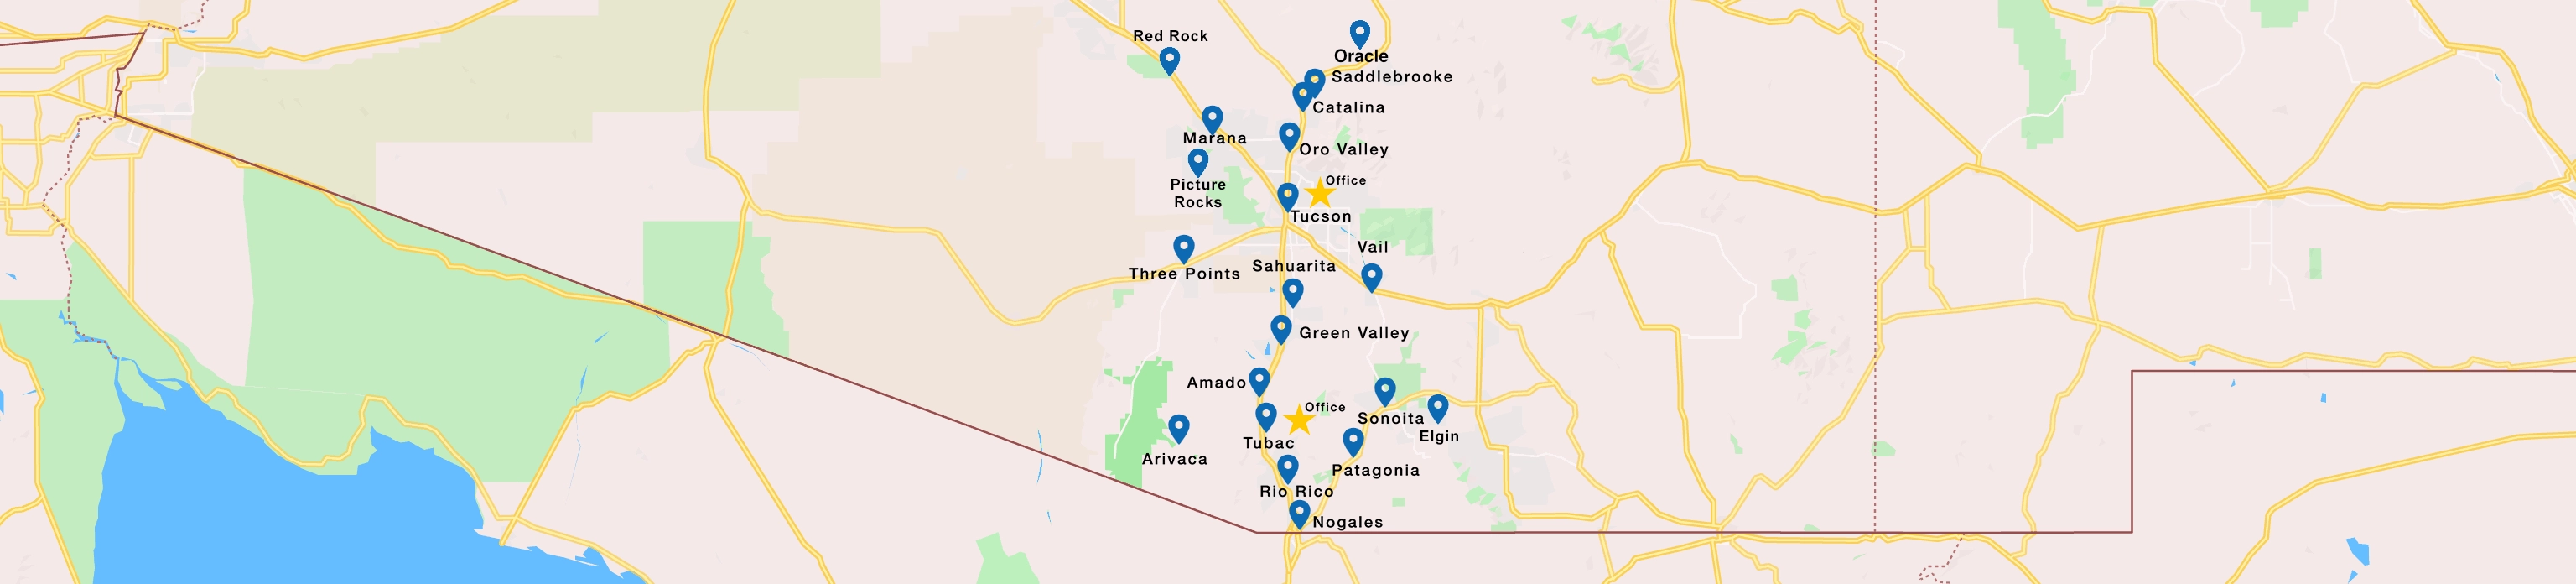 map of Tucson and neighboring towns soulistic hospice serves